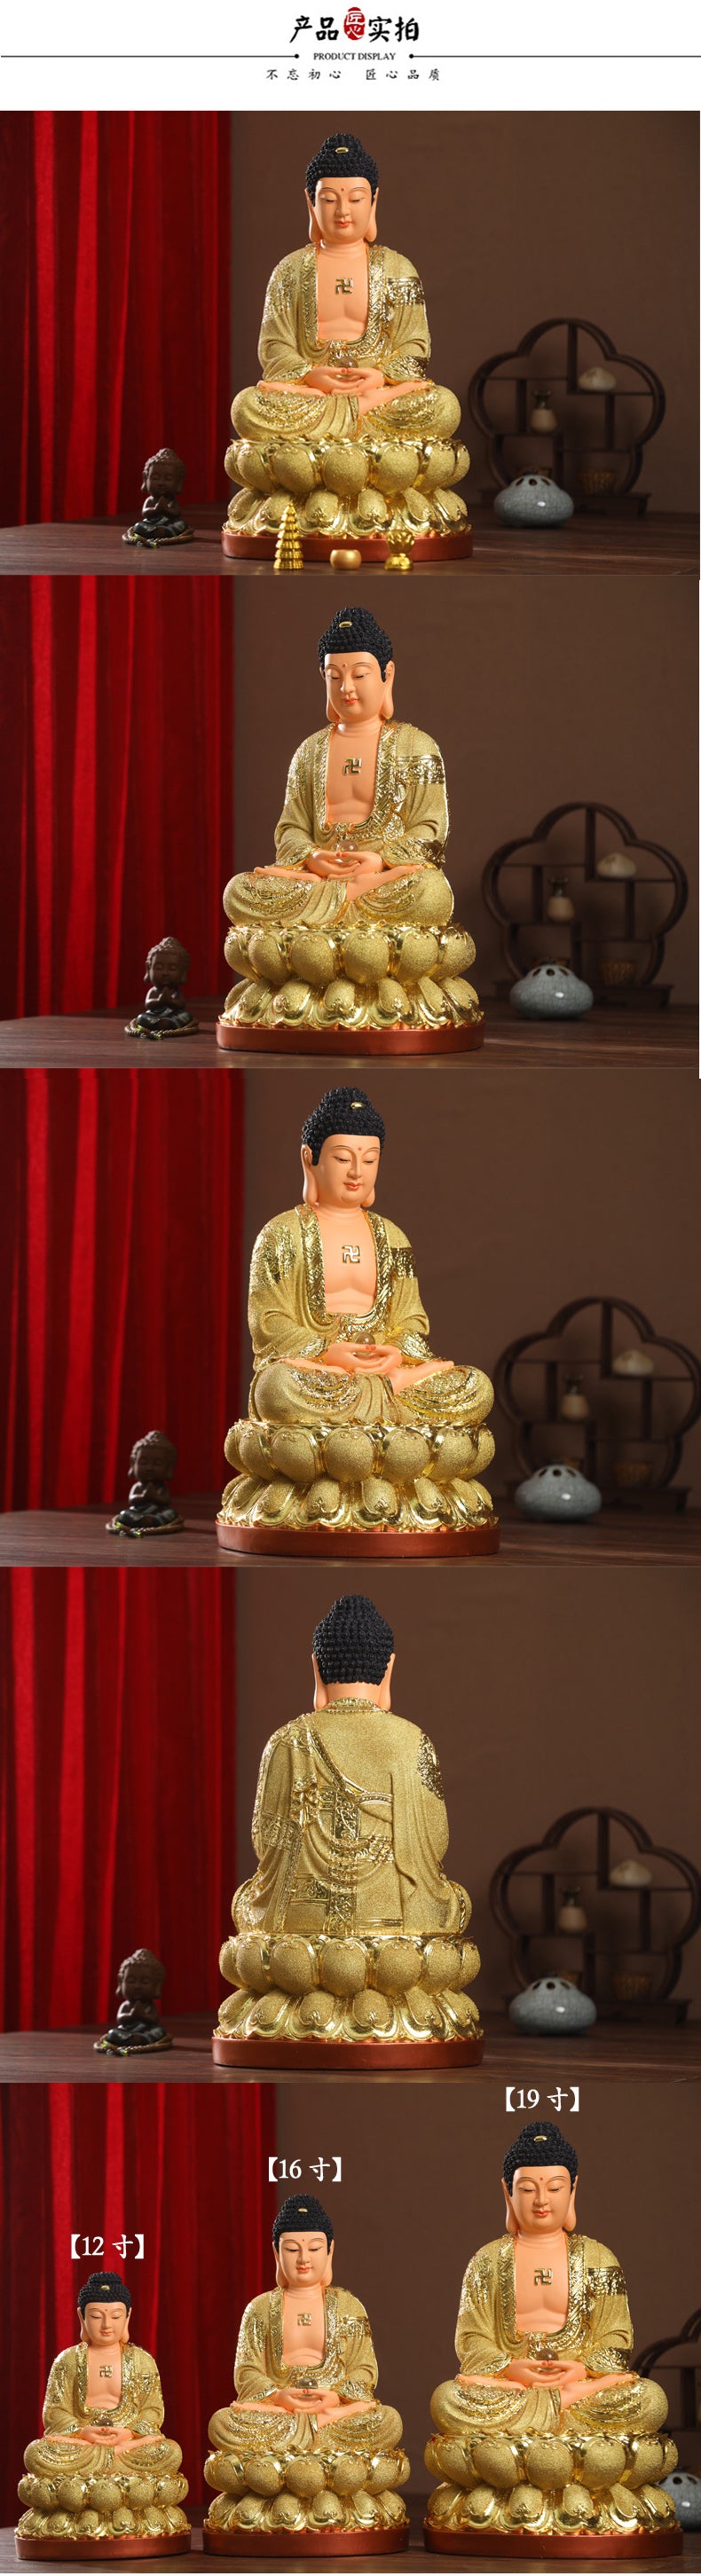 Seated Shakyamuni Buddha Statue for Sale, Sand Gold Resin Material, Offerings Product Details Description Introduction-3